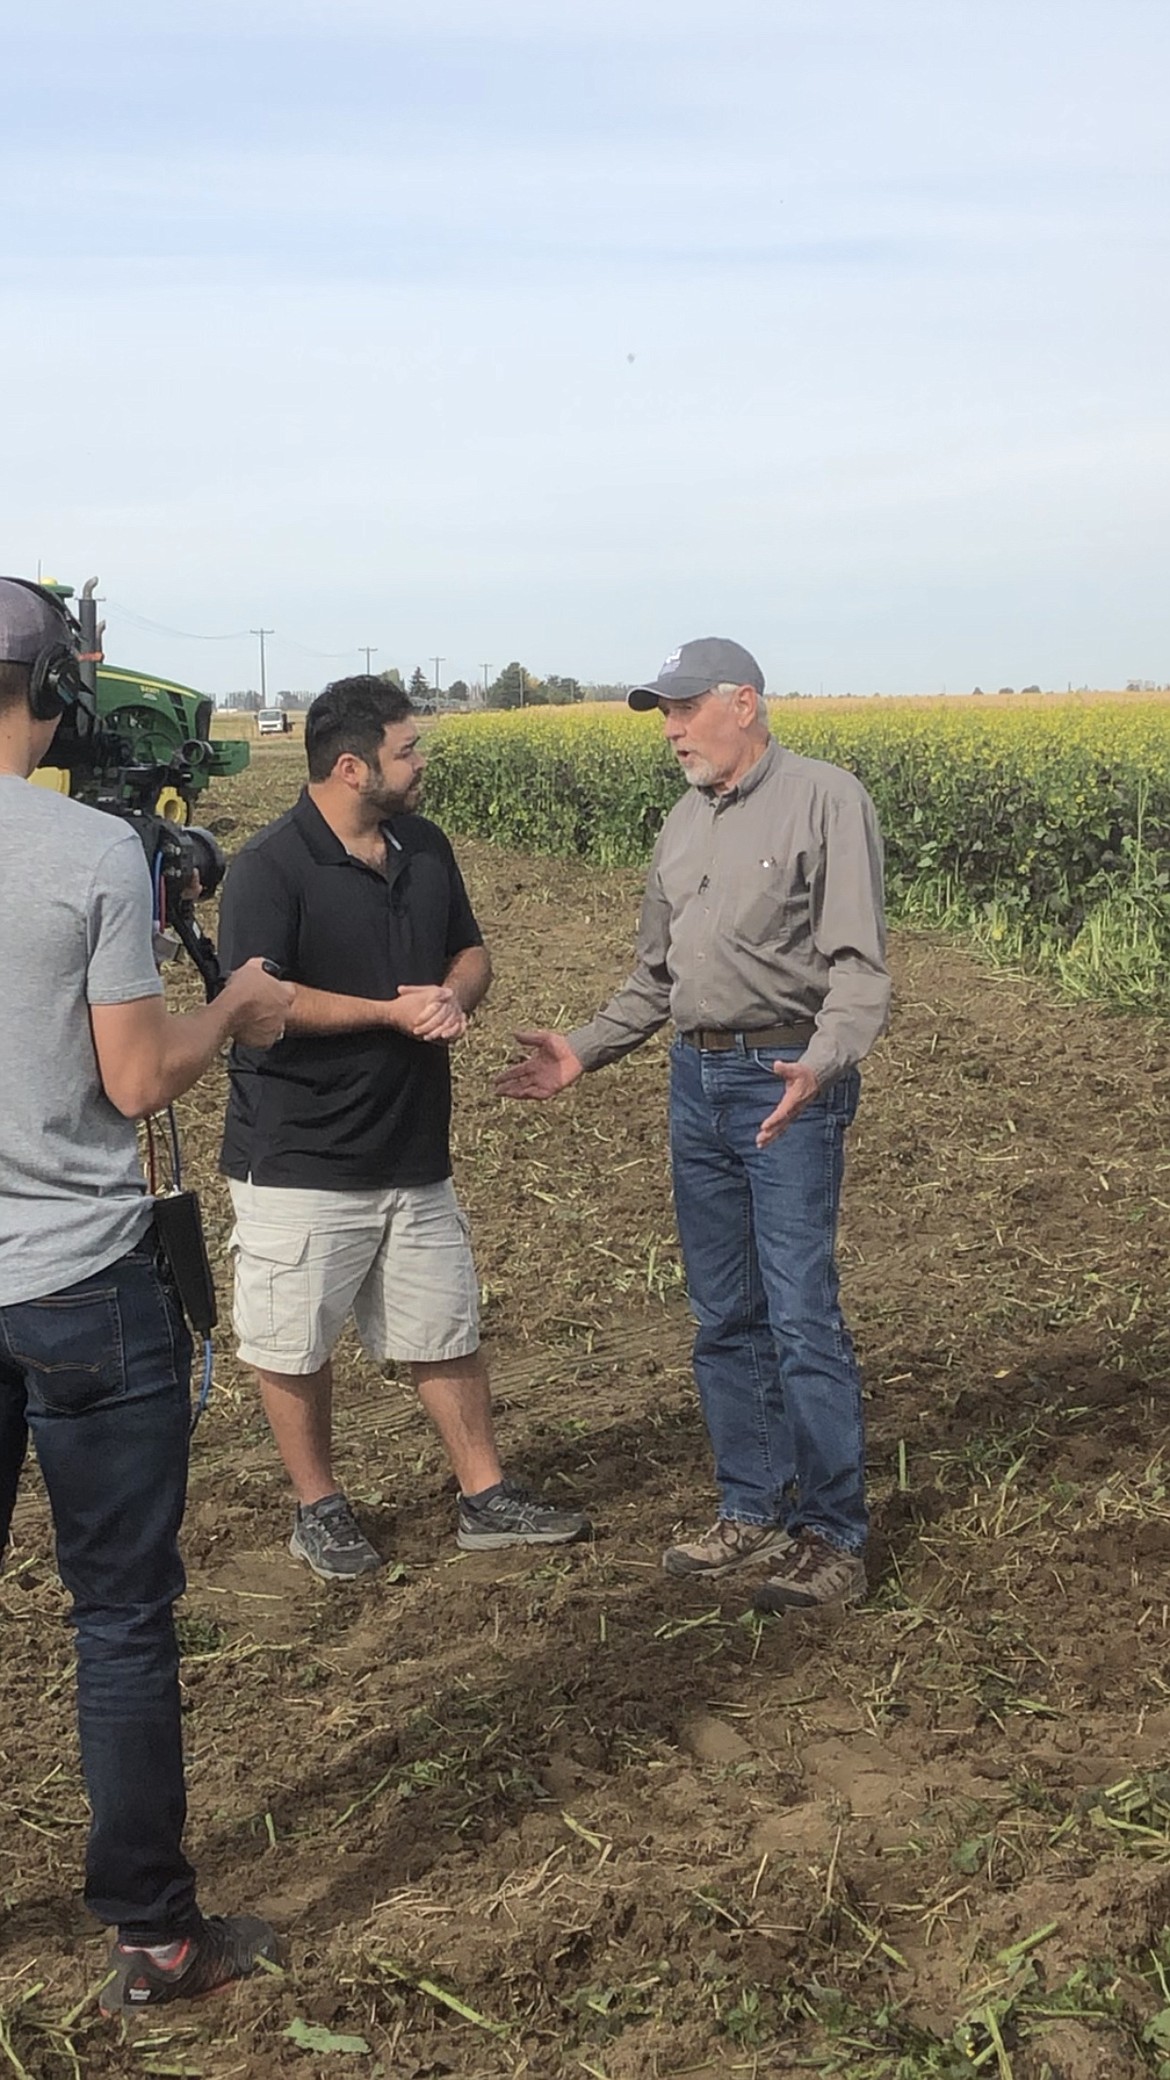 Harold Crose, right, gives an interview for a 2019 “Washington Grown” TV episode on soil health and cover cropping.